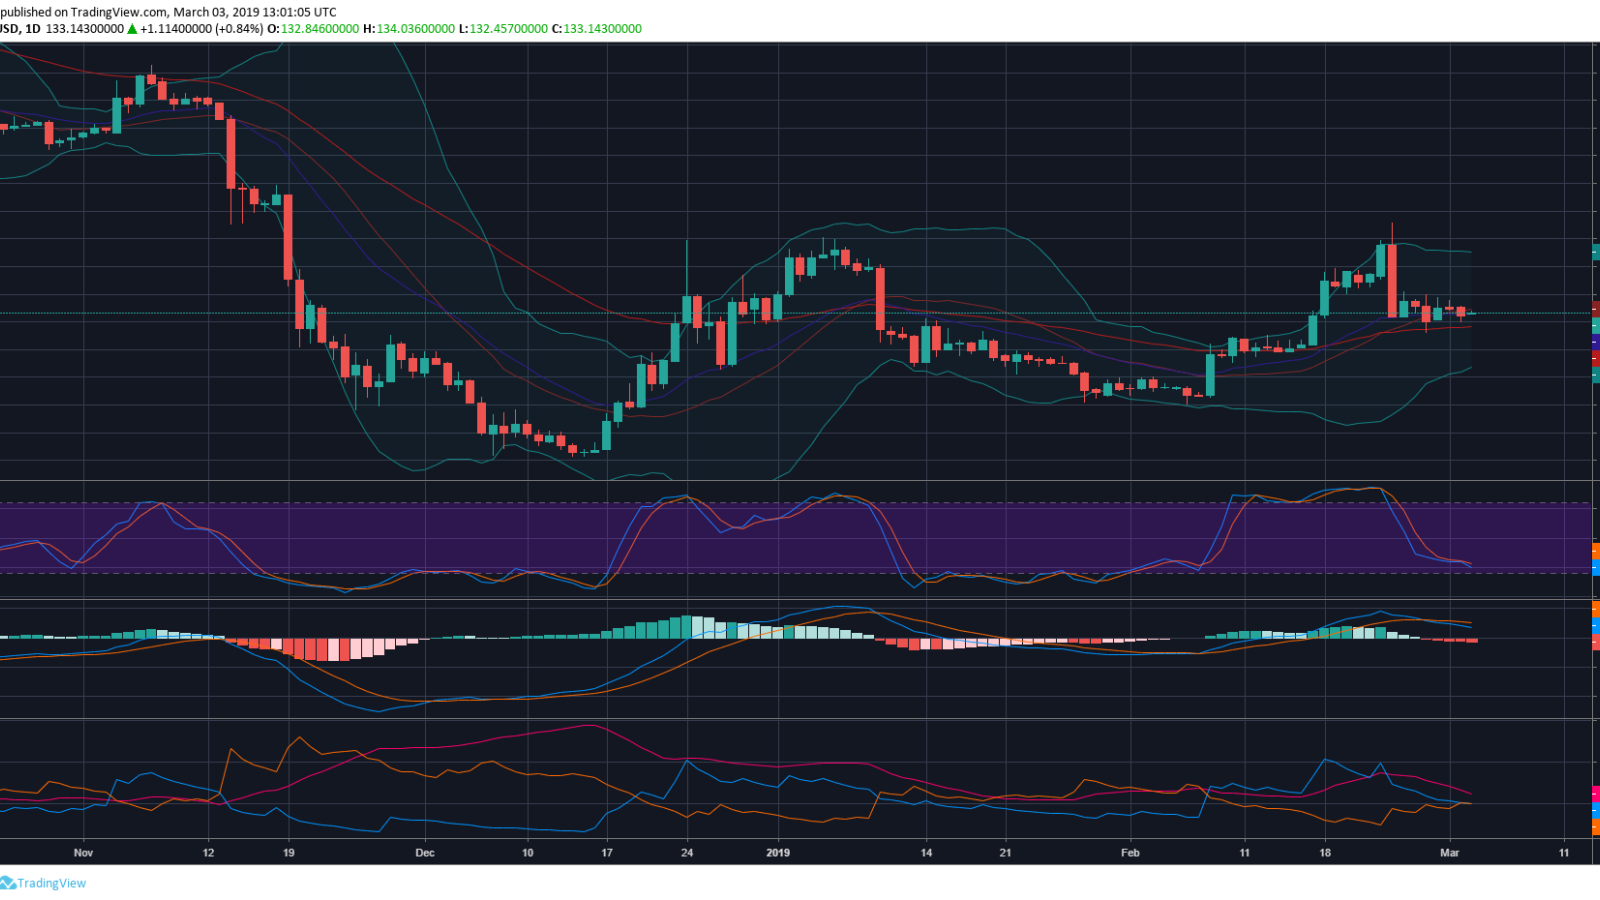 Ethereum price prediction for March 2019